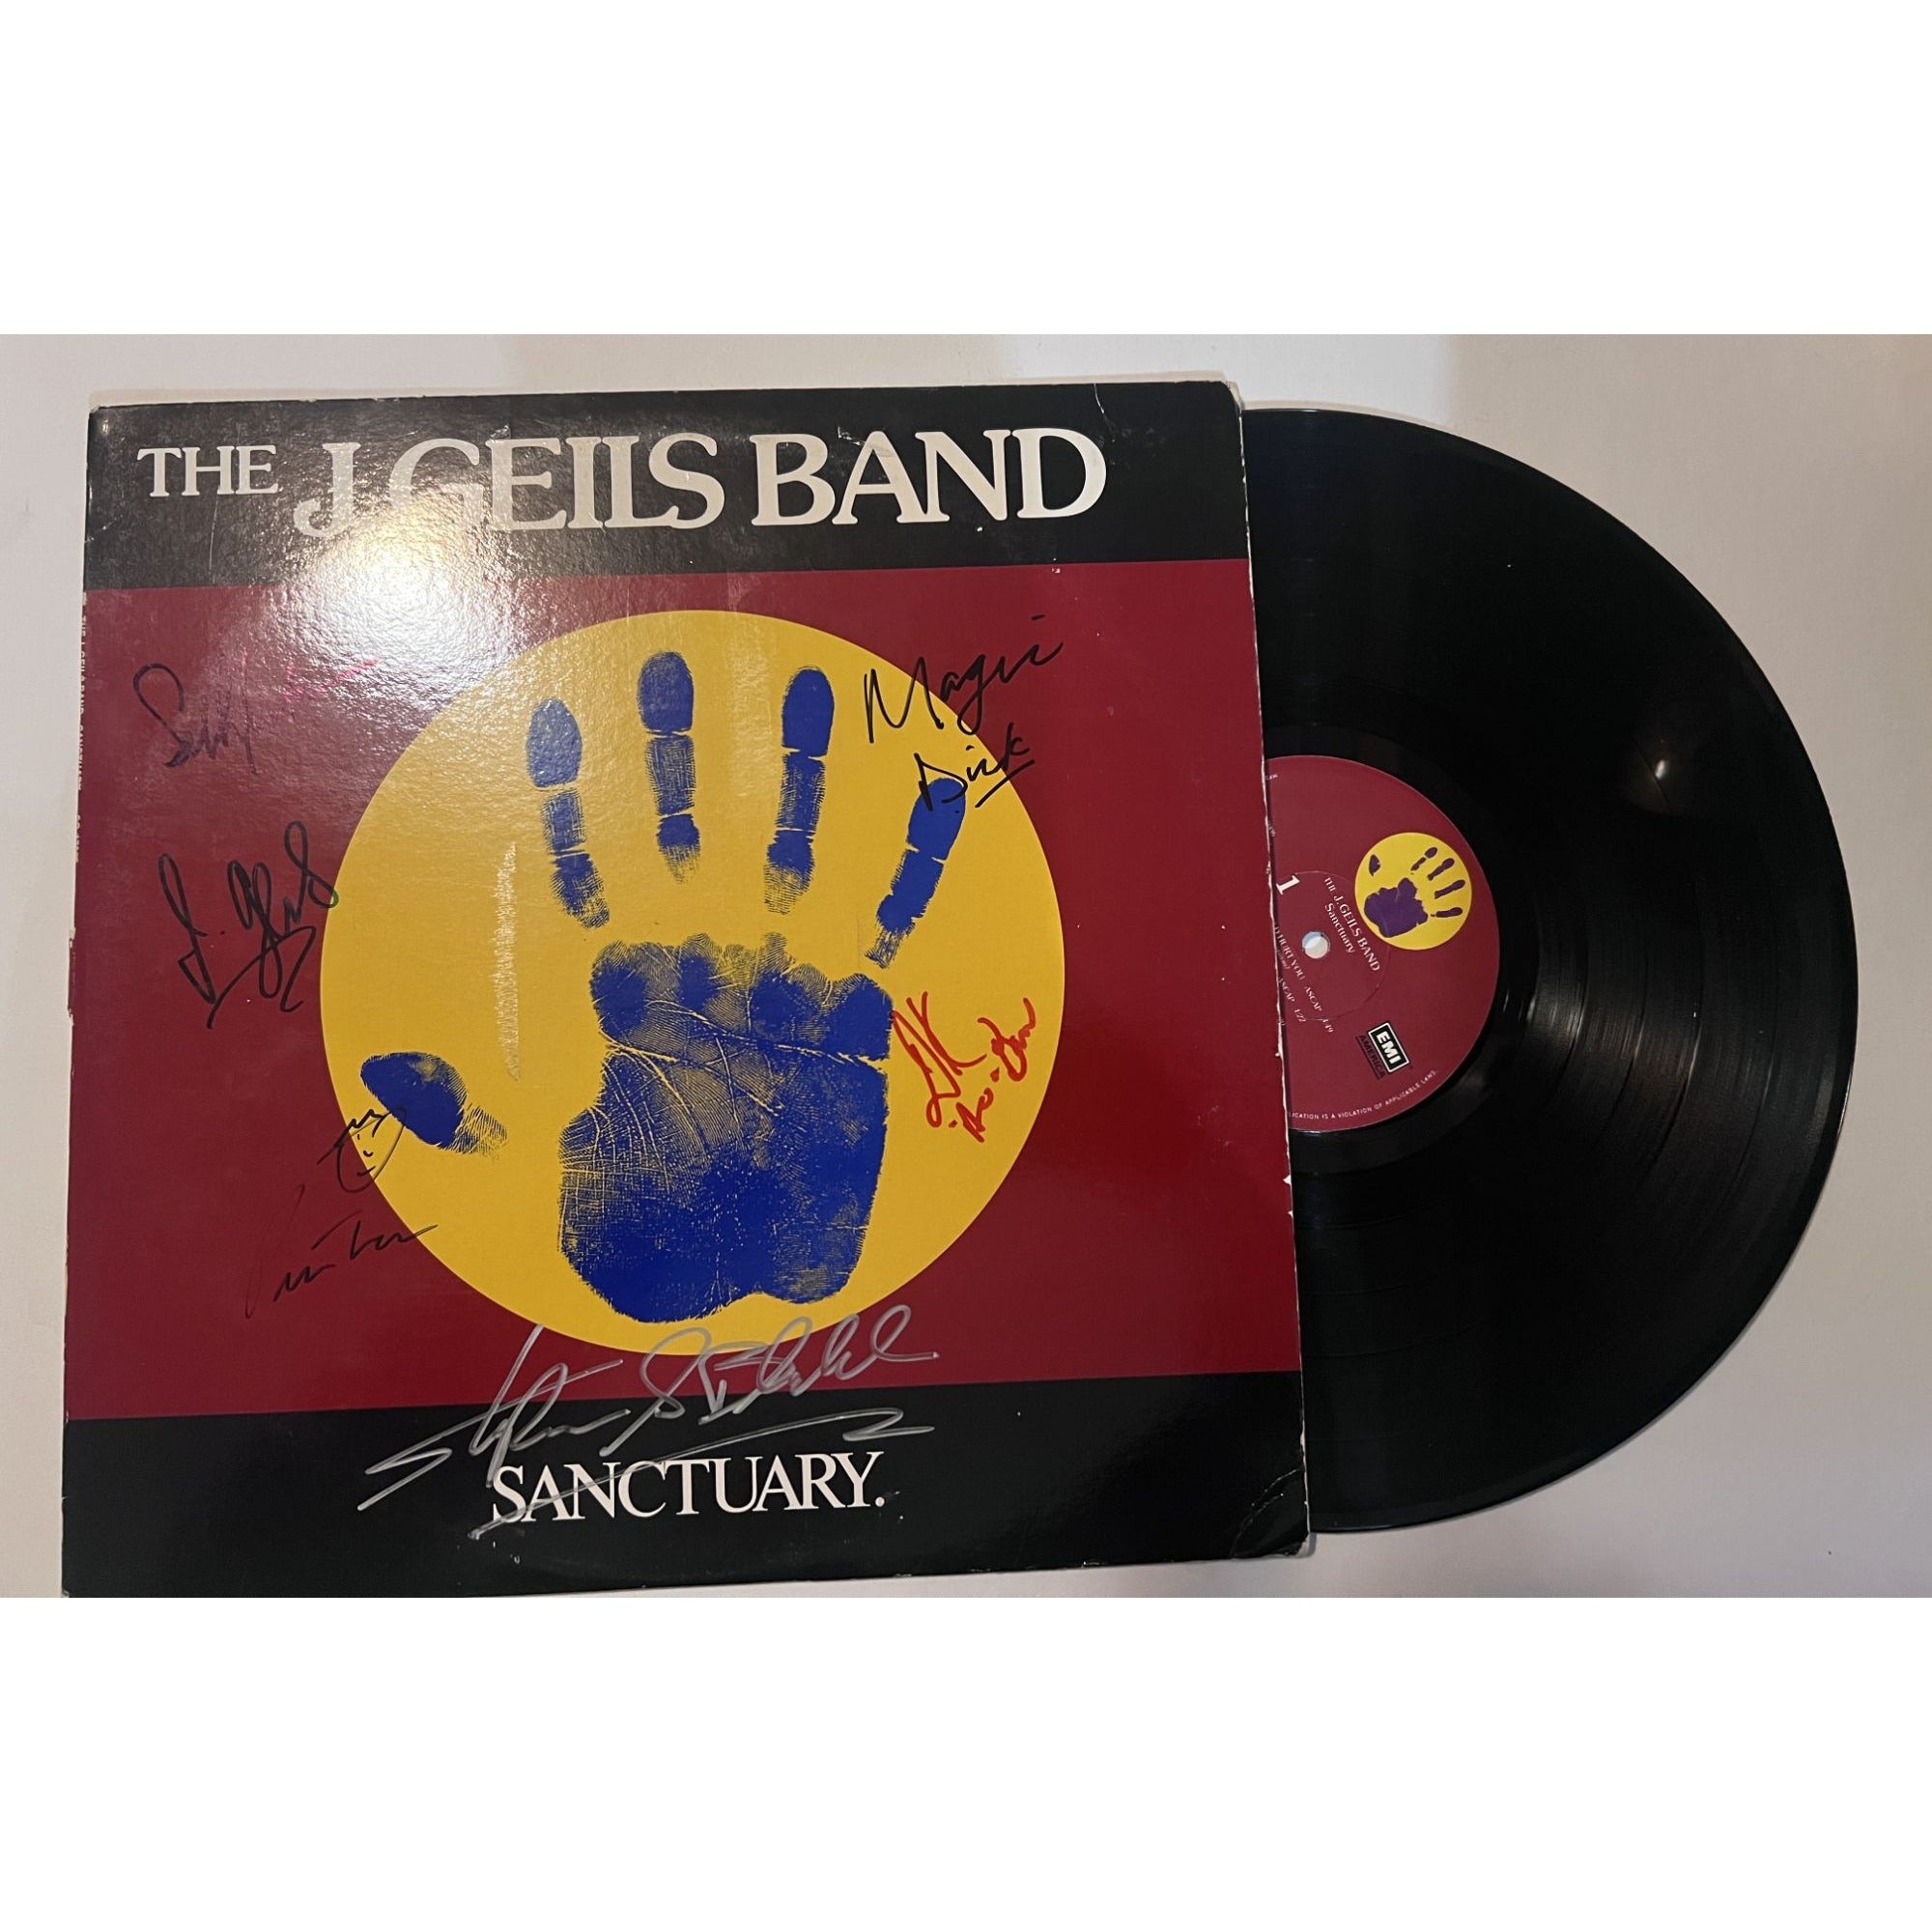 Geils Band original Sanctuary LP Peter Wolf, Magic Dick, Seth Justman, Danny Klein and J. Geils signed with proof